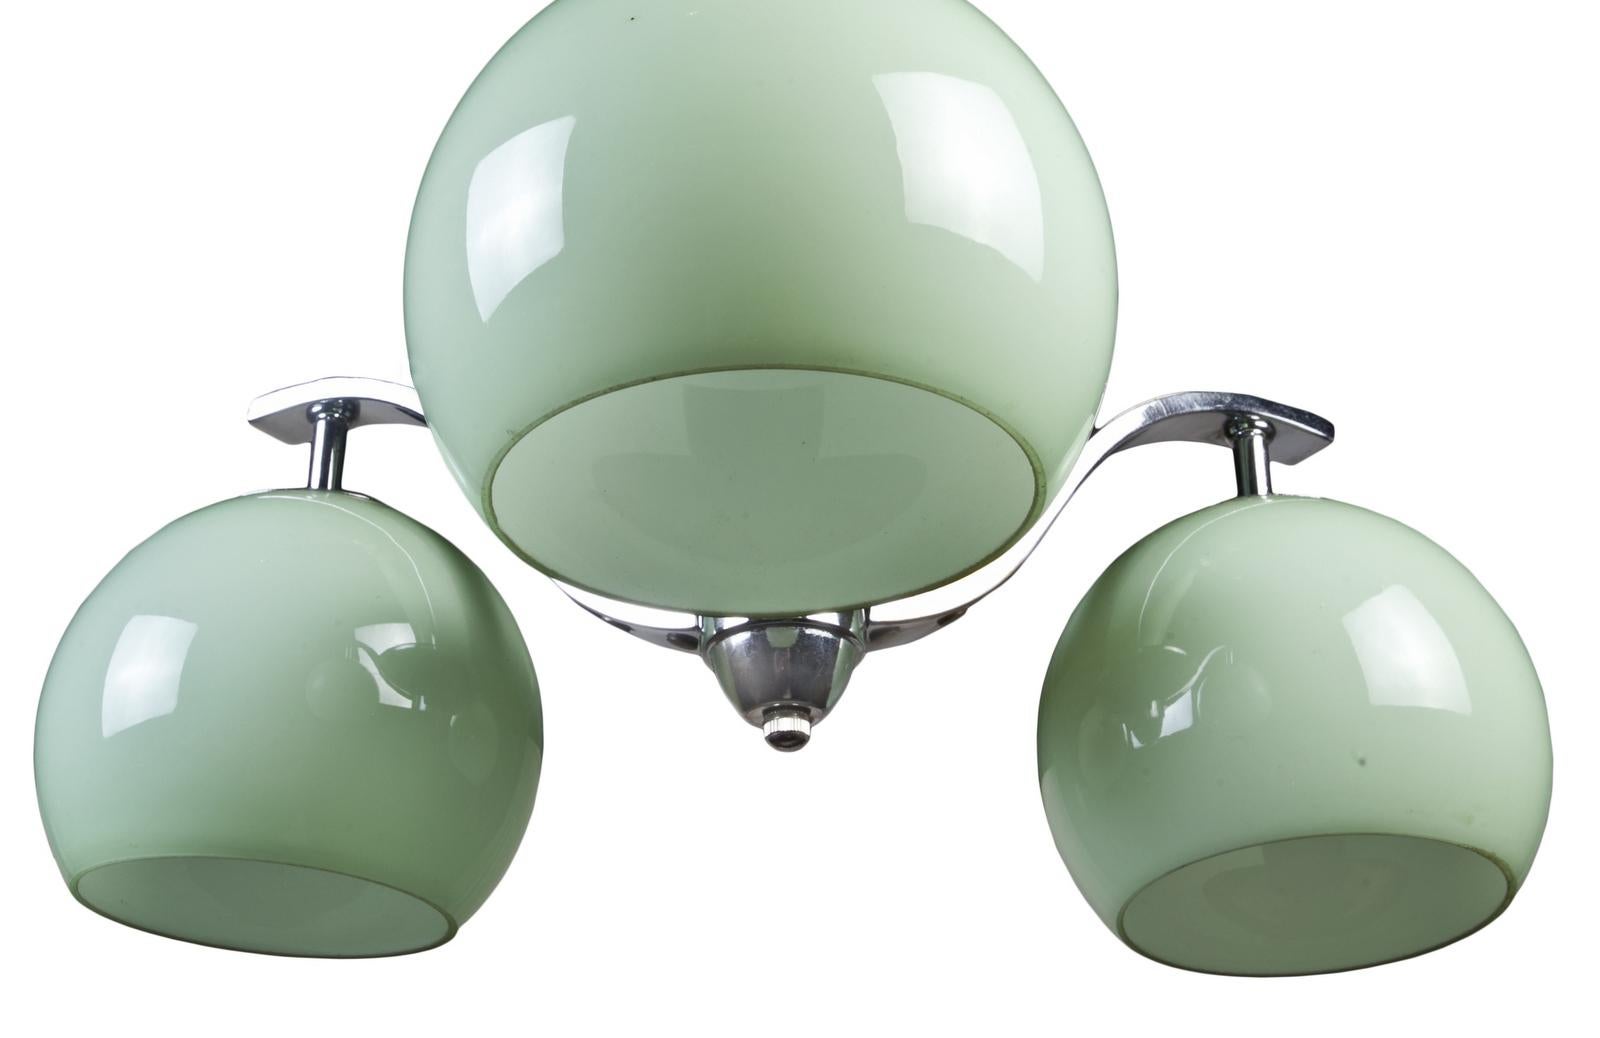 A three-arm Art Deco pendant chandelier in a lovely soft green glass. European, but rewired for American use and takes E-14 European bulbs which are easy to get. Chrome hardware and comes with chain and canopy.